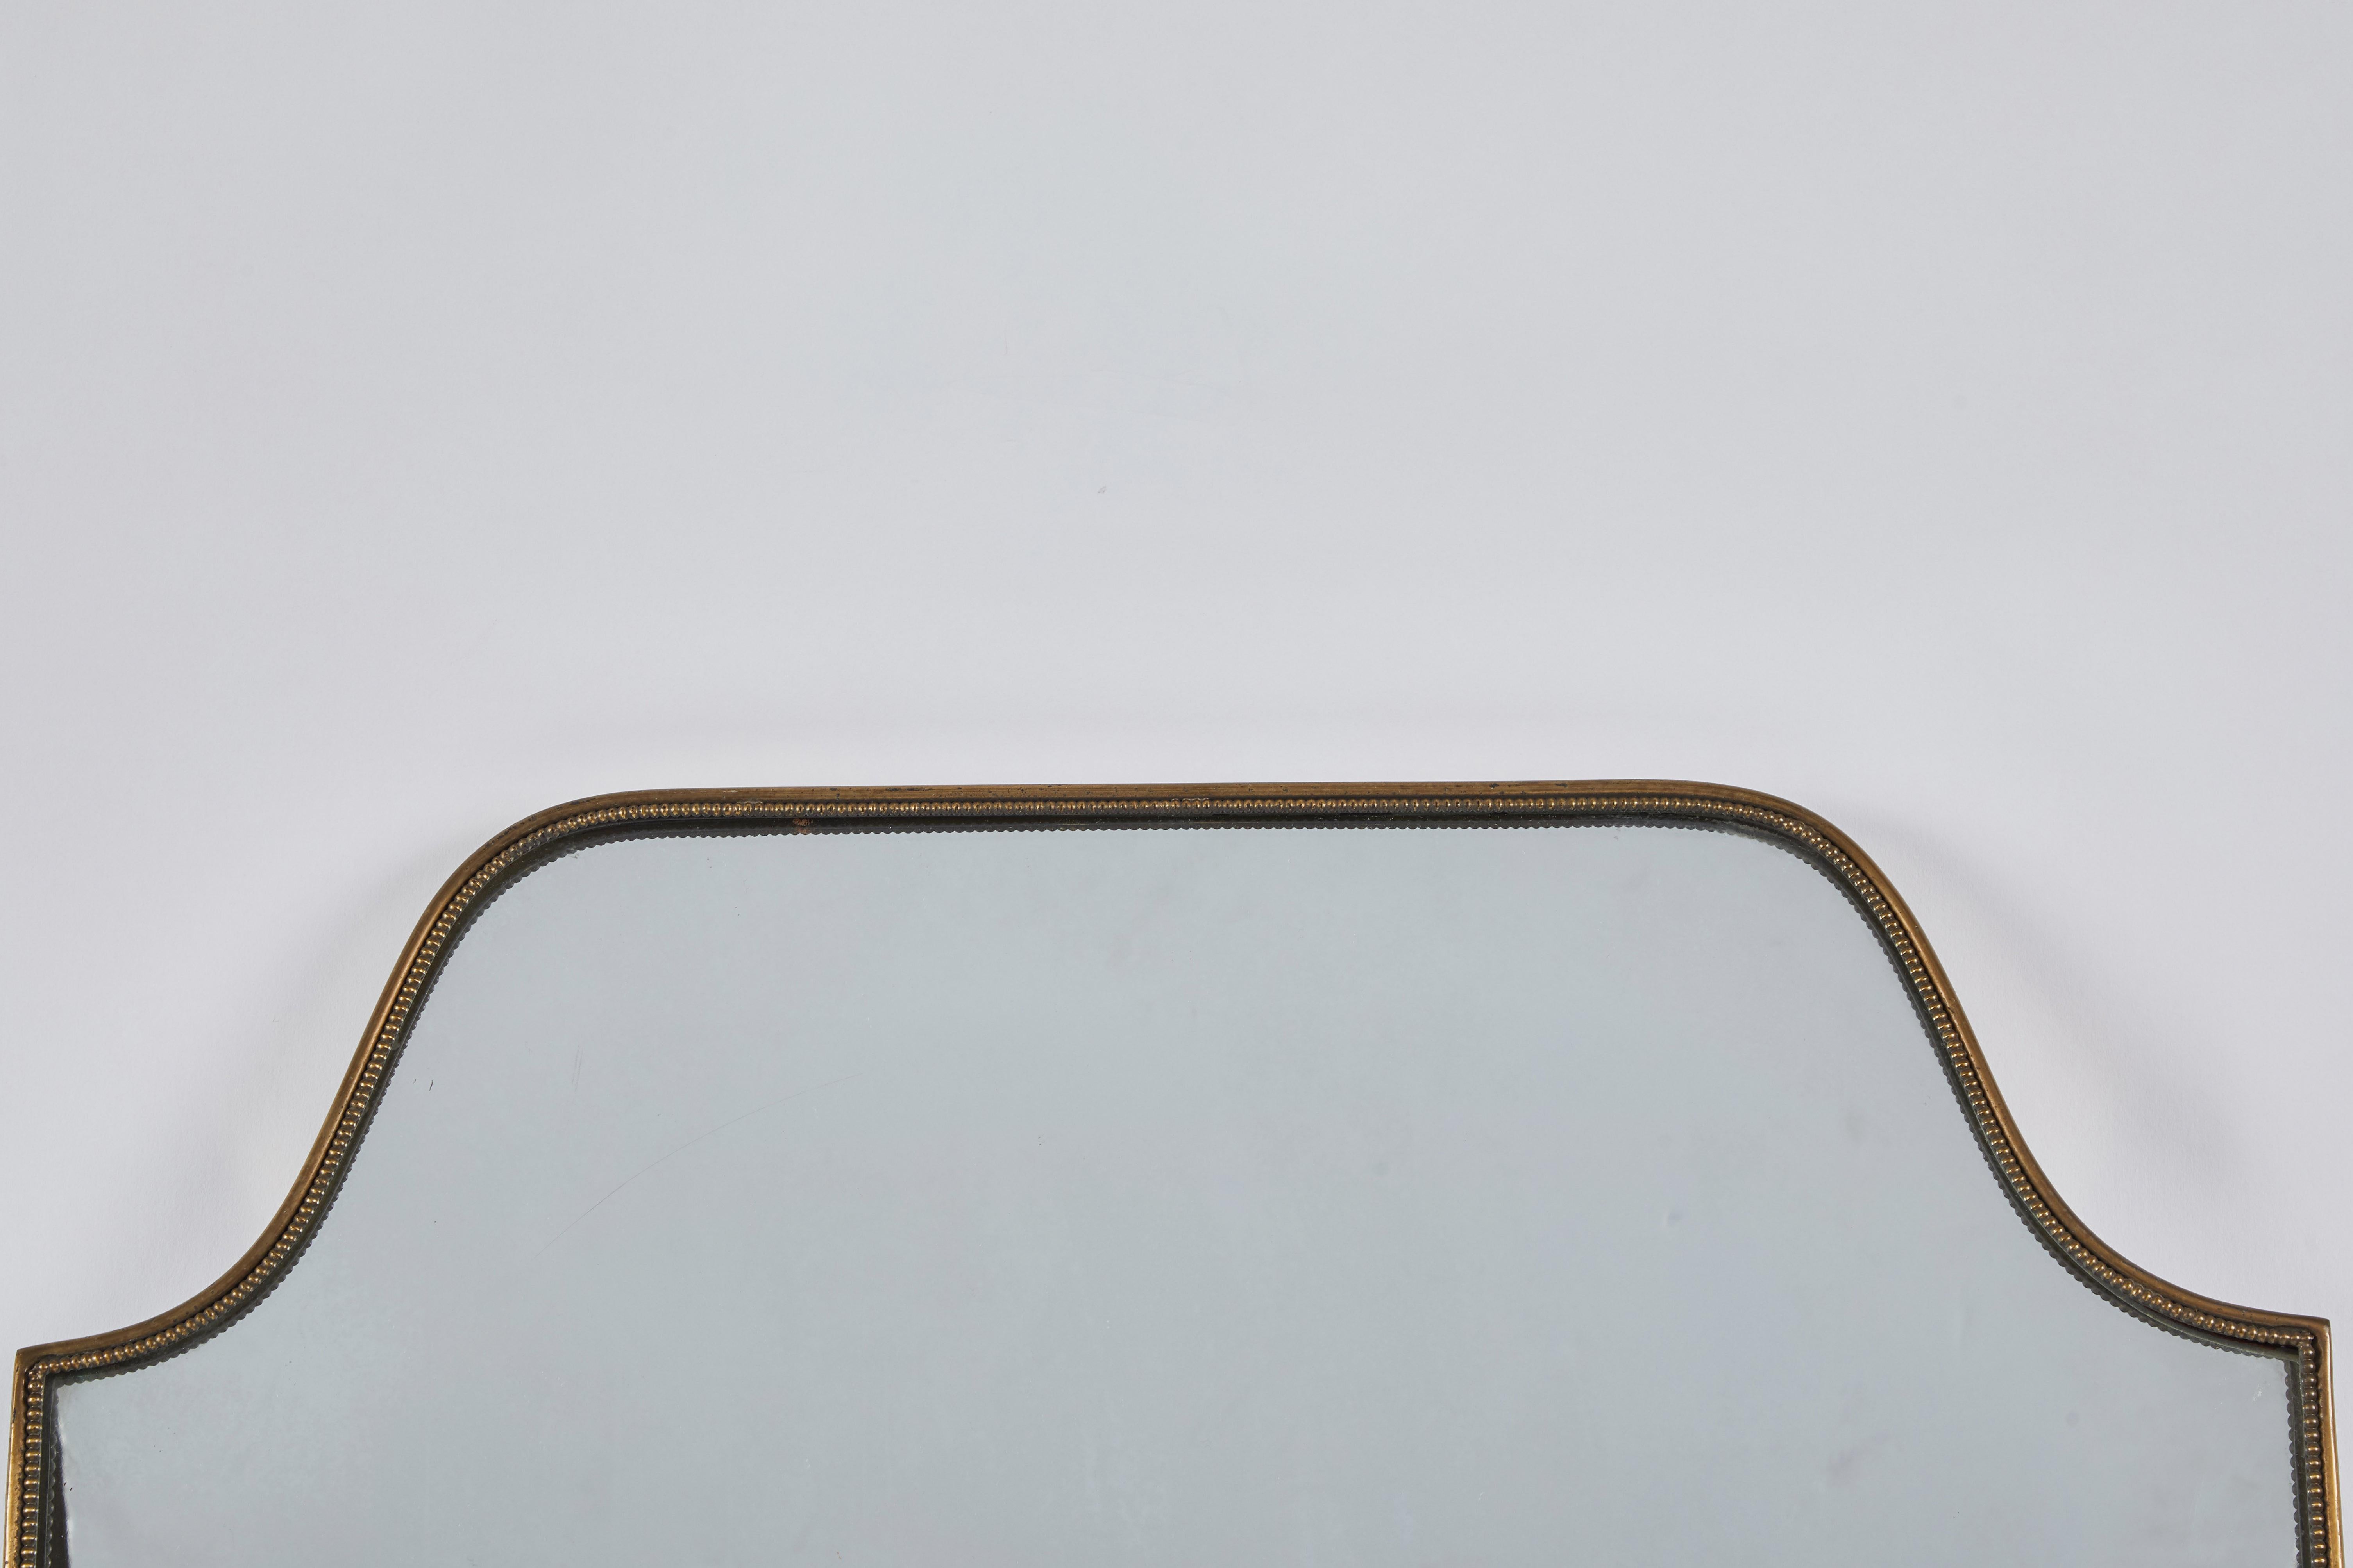 1970s Italian brass shield mirror with sweet trim and brass screw details throughout. Slightly masculine, but clean in style, the scale of this mirror allows for a variety of uses. Good overall brass condition and mirror condition.